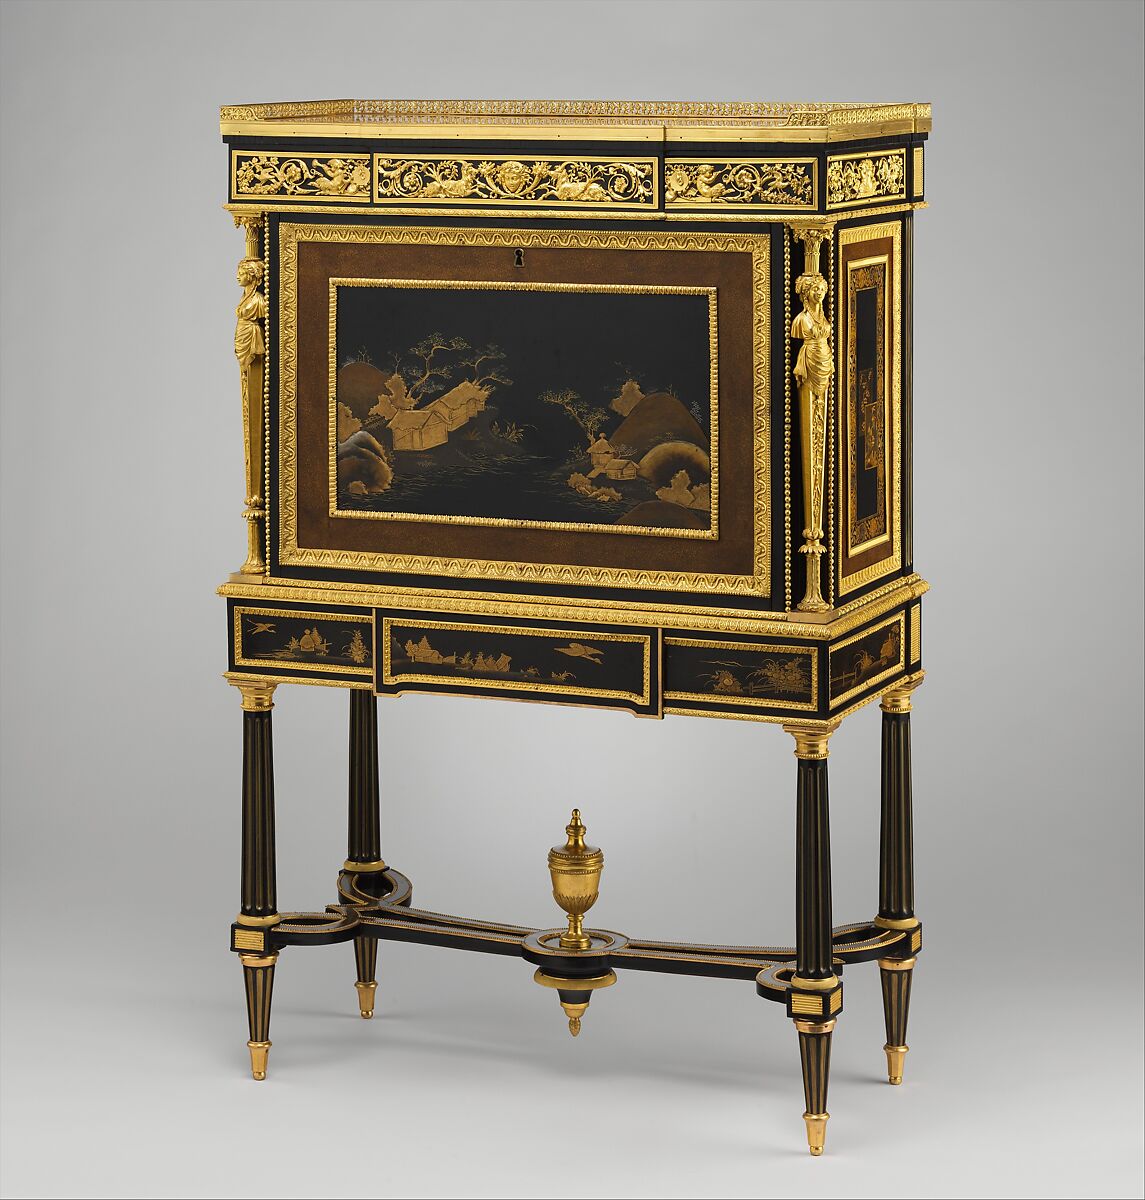 Drop-front secretary on stand (secrètaire à abattant or secrétaire en cabinet) (one of a pair) (part of a set), Adam Weisweiler (French, 1744–1820), Oak veneered with ebony, amaranth, holly, ebonized holly, satinwood, Japanese and French lacquer panels, gilt-bronze mounts, brocatelle marble top (not original); steel springs; morocco leather (not original), French, Paris 